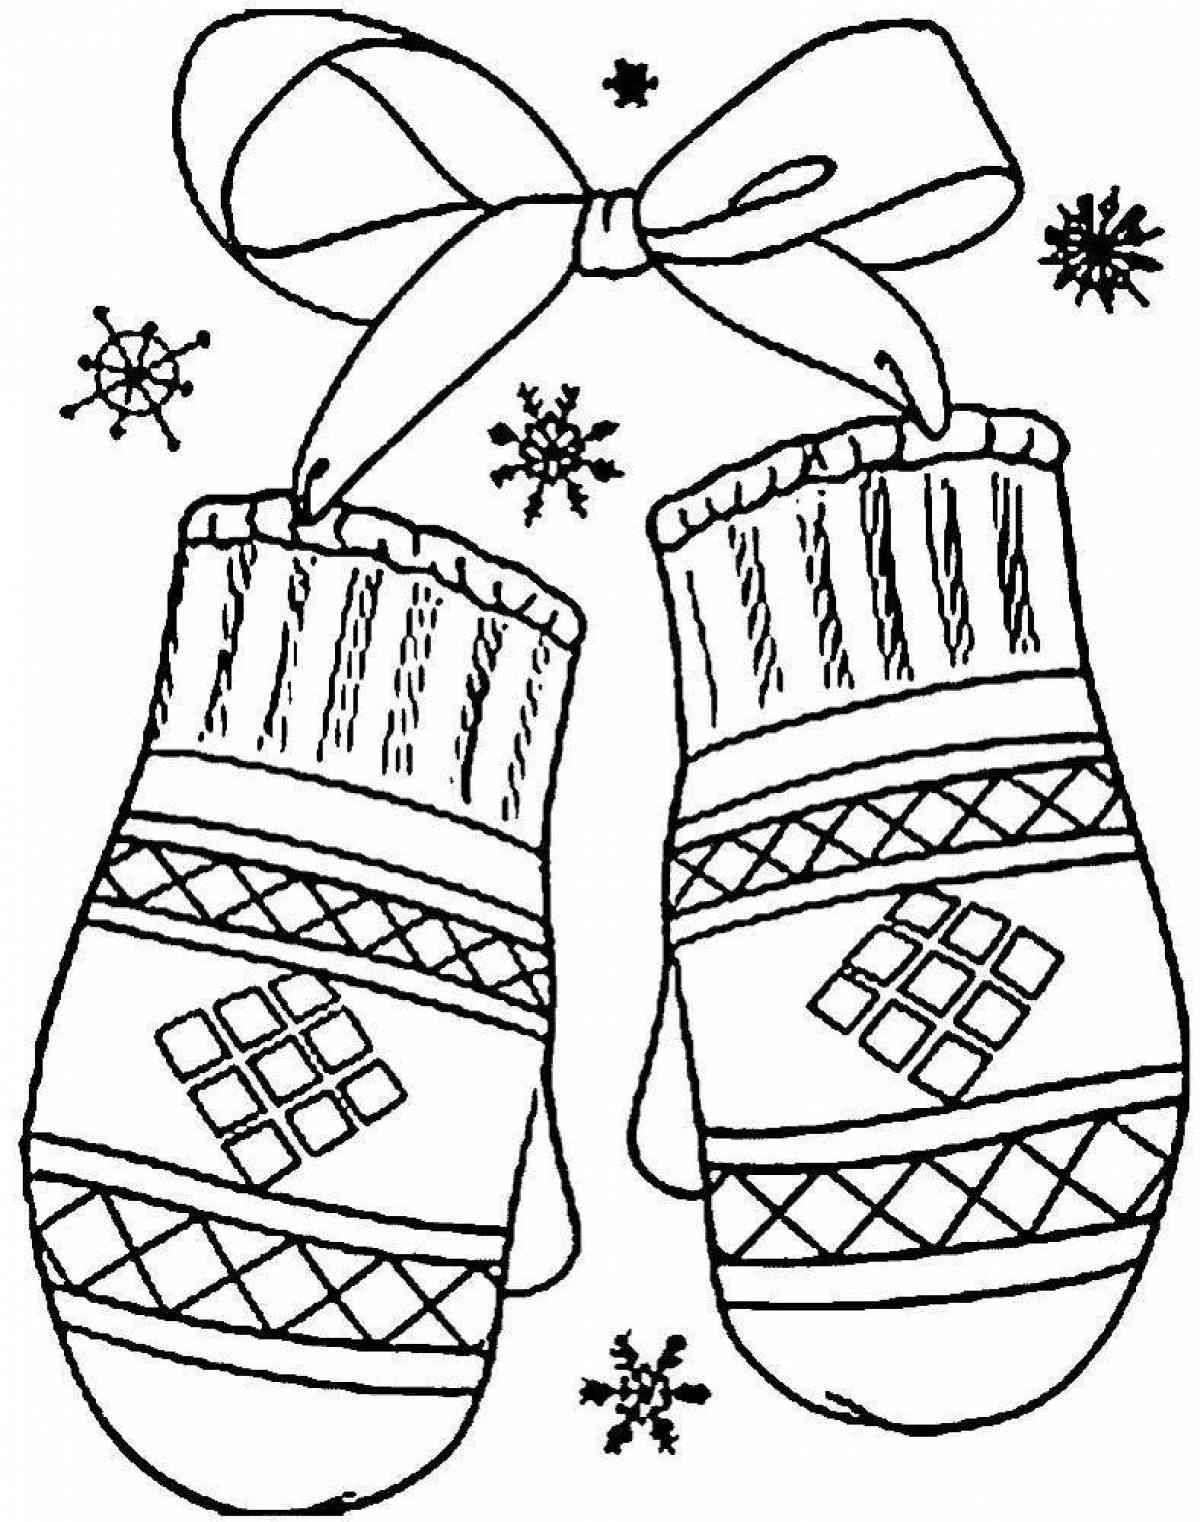 Exotic winter Christmas coloring book